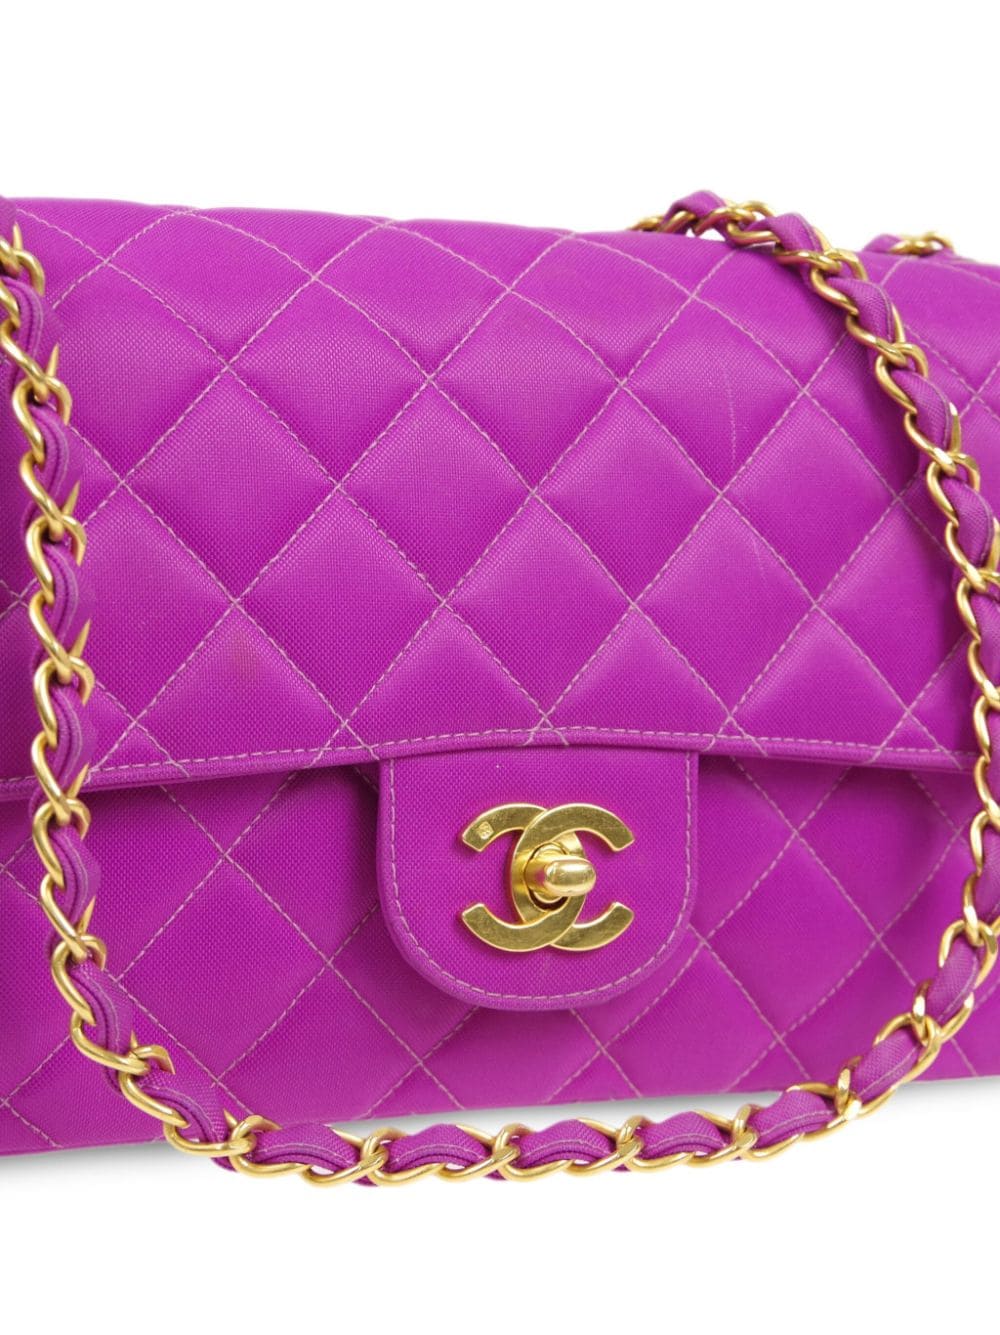 Pre-owned Chanel 1995 Medium Classic Flap Shoulder Bag In Purple